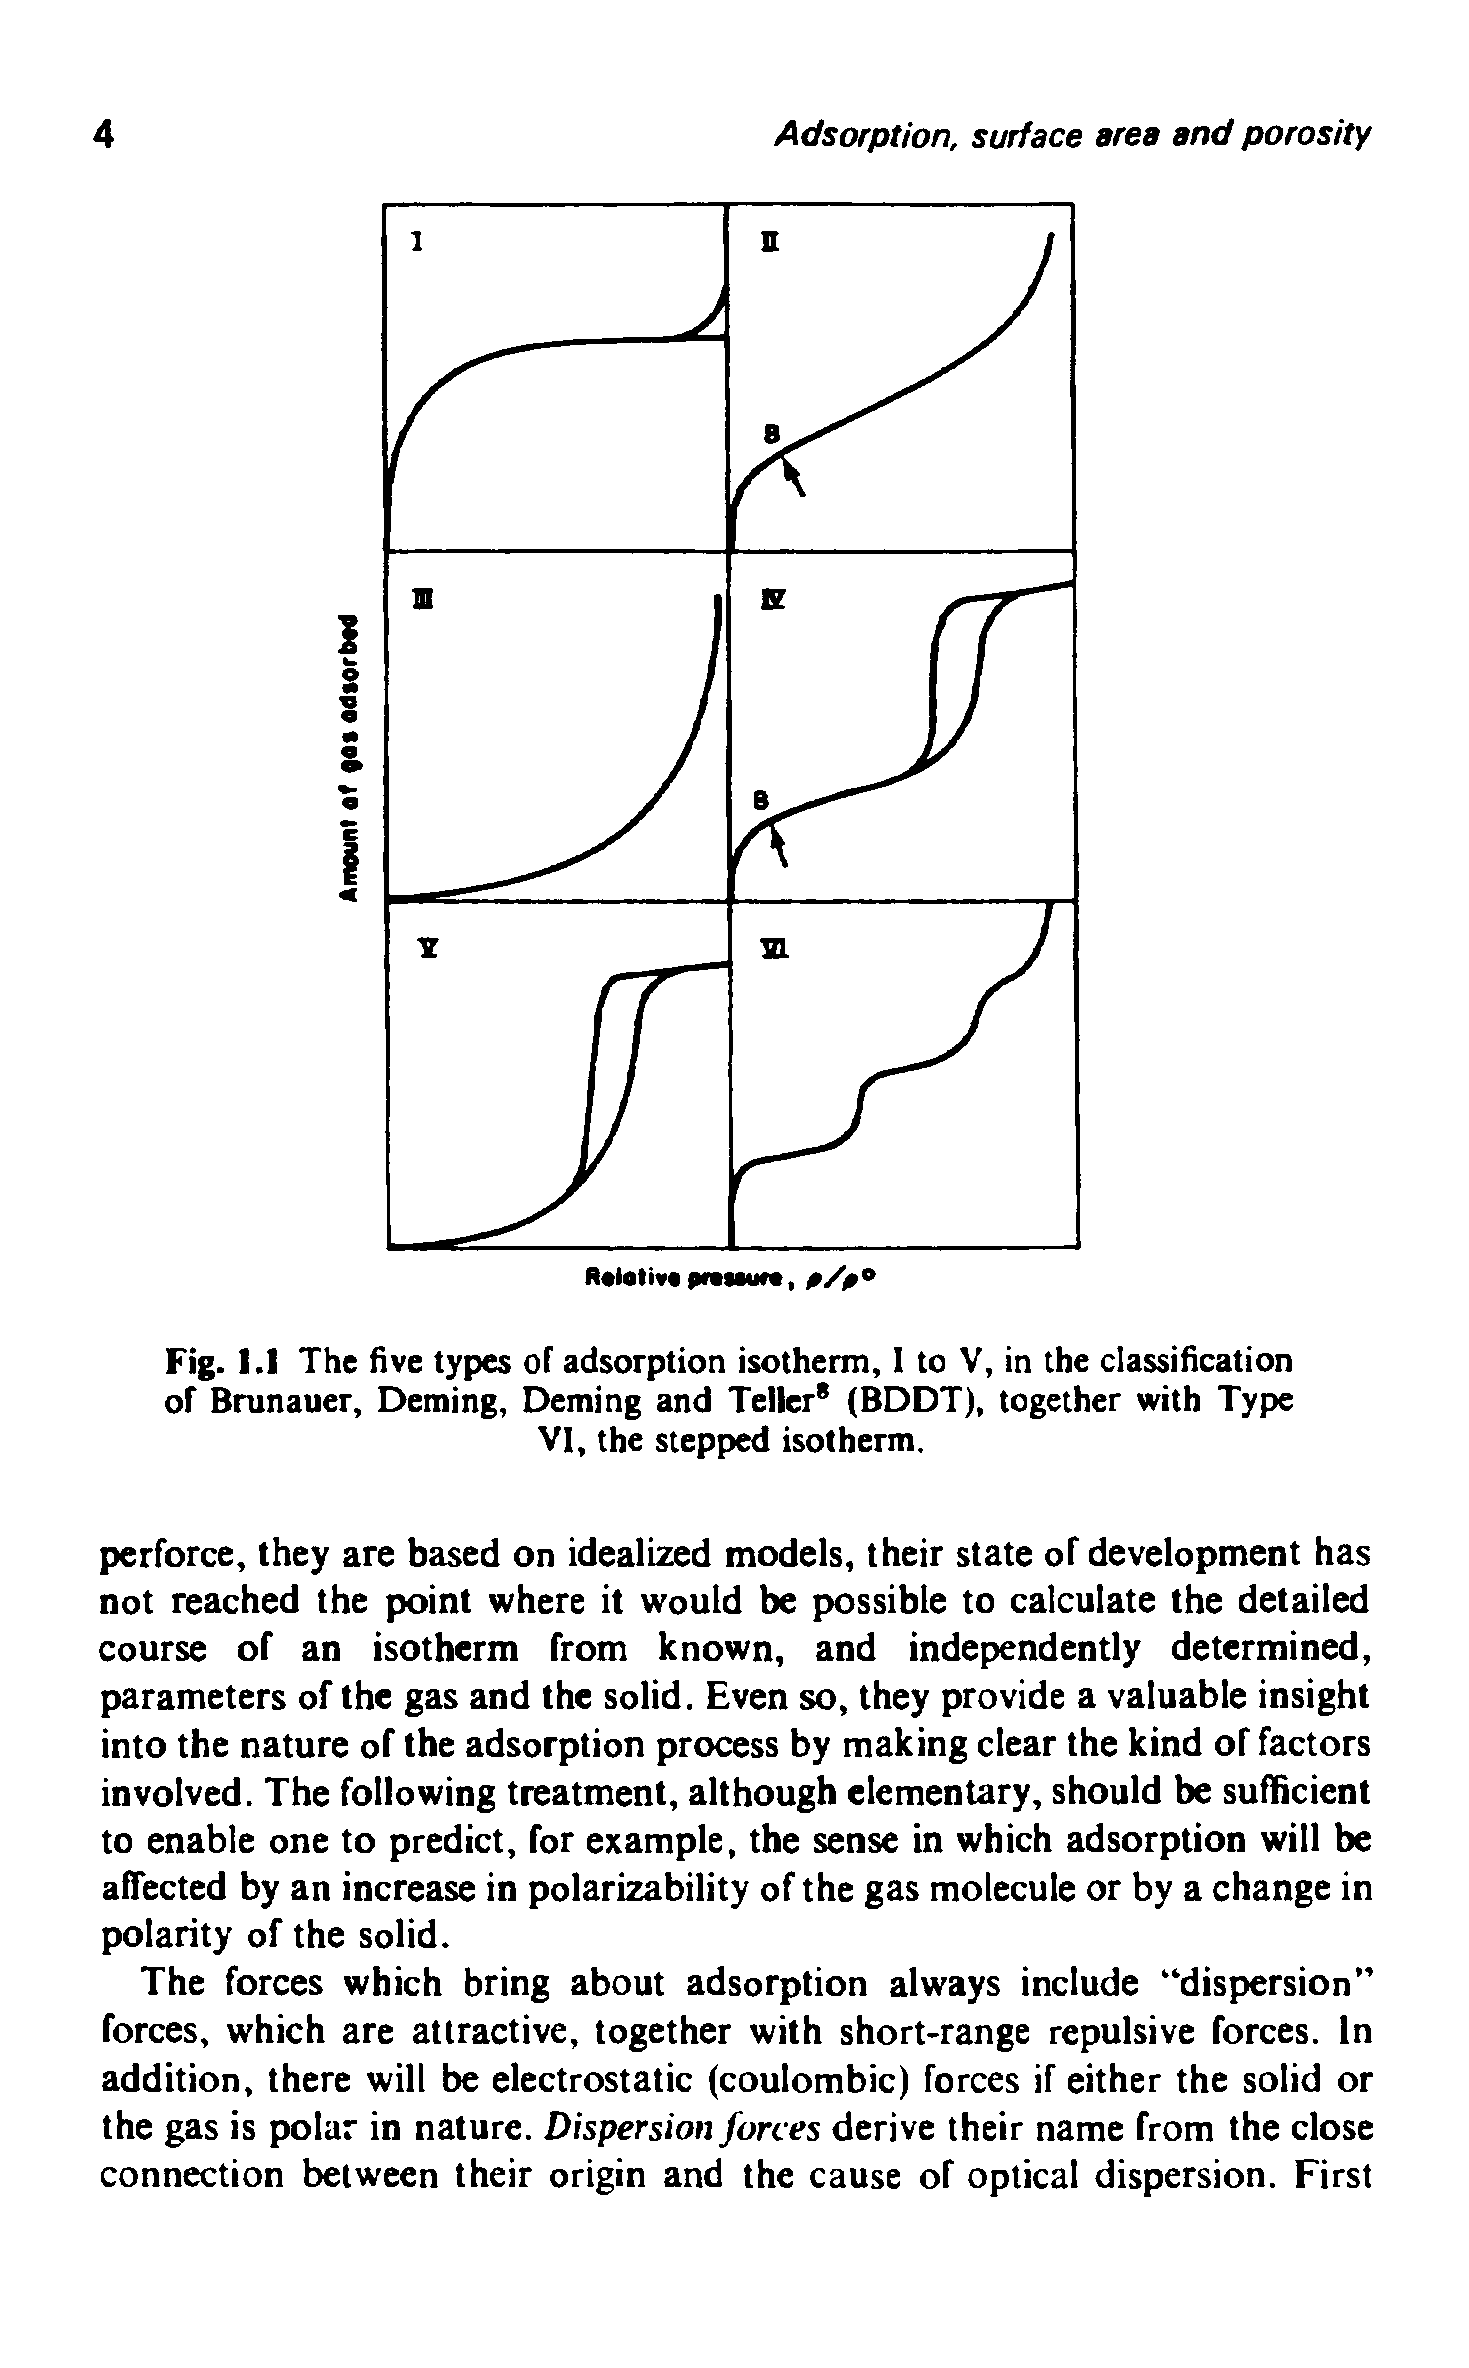 Fig. I.l The five types of adsorption isotherm, I to V, in the classification of Brunauer, Deming, Deming and Teller (BDDT), together with Type VI, the stepped isotherm.